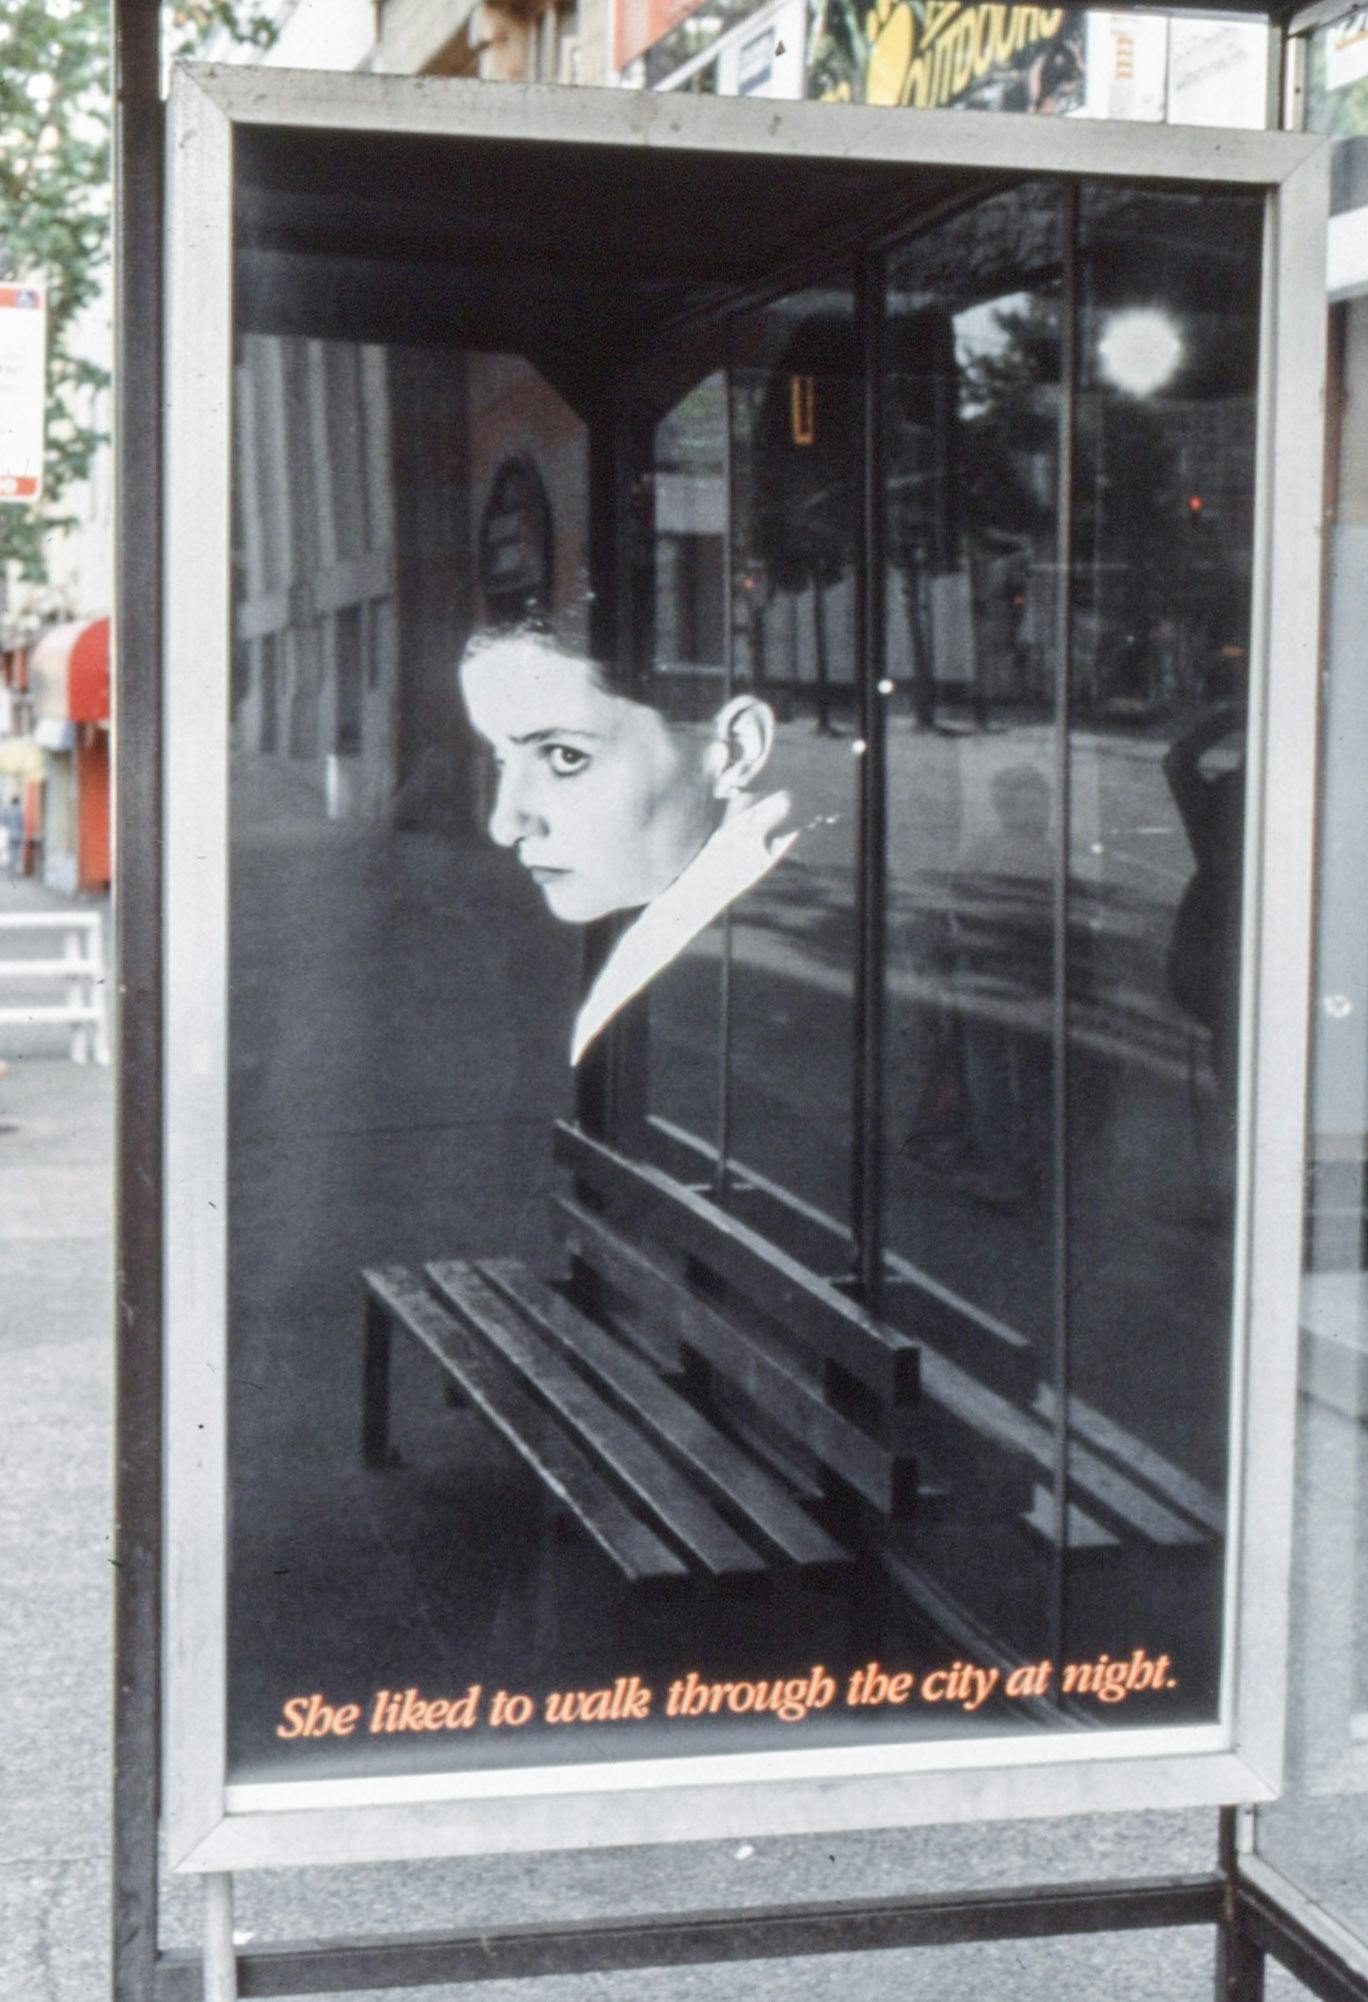 A dark photo in a bus shelter shows a person with makeup in a suit looking to the side dramatically. Orange text at the bottom of the image reads "She liked to walk through the city at night."